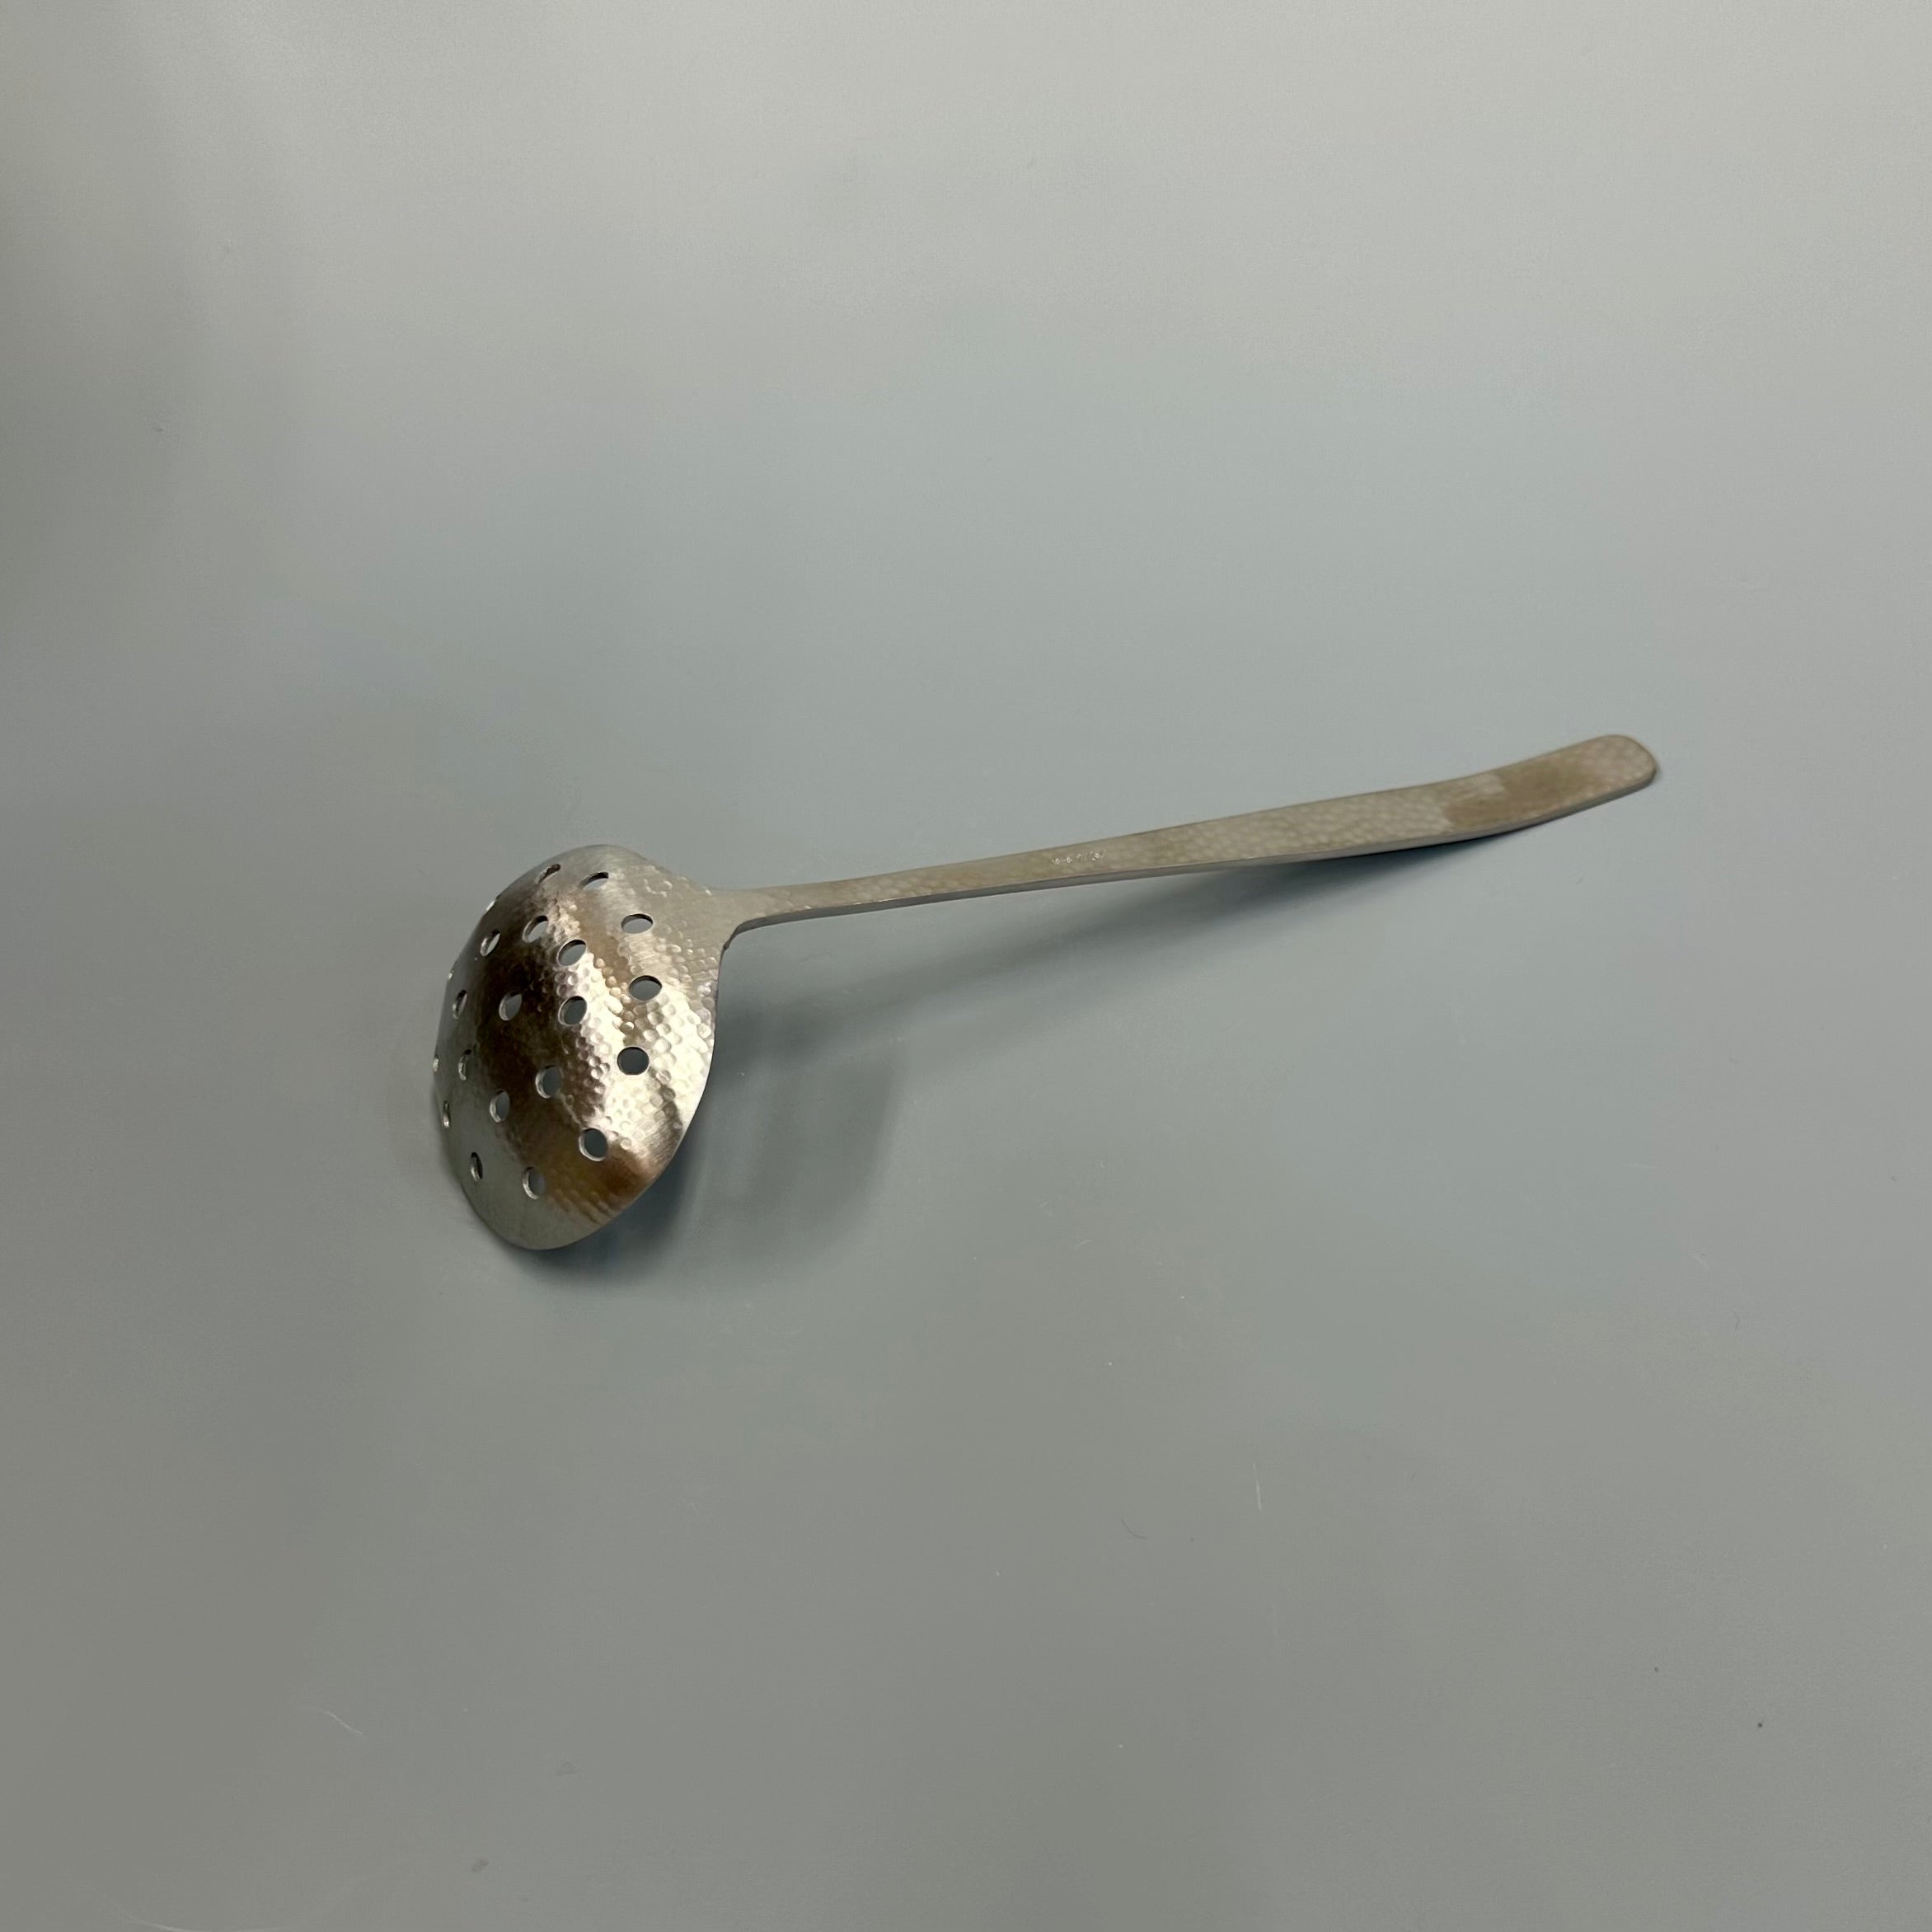 Ladle (perforated)